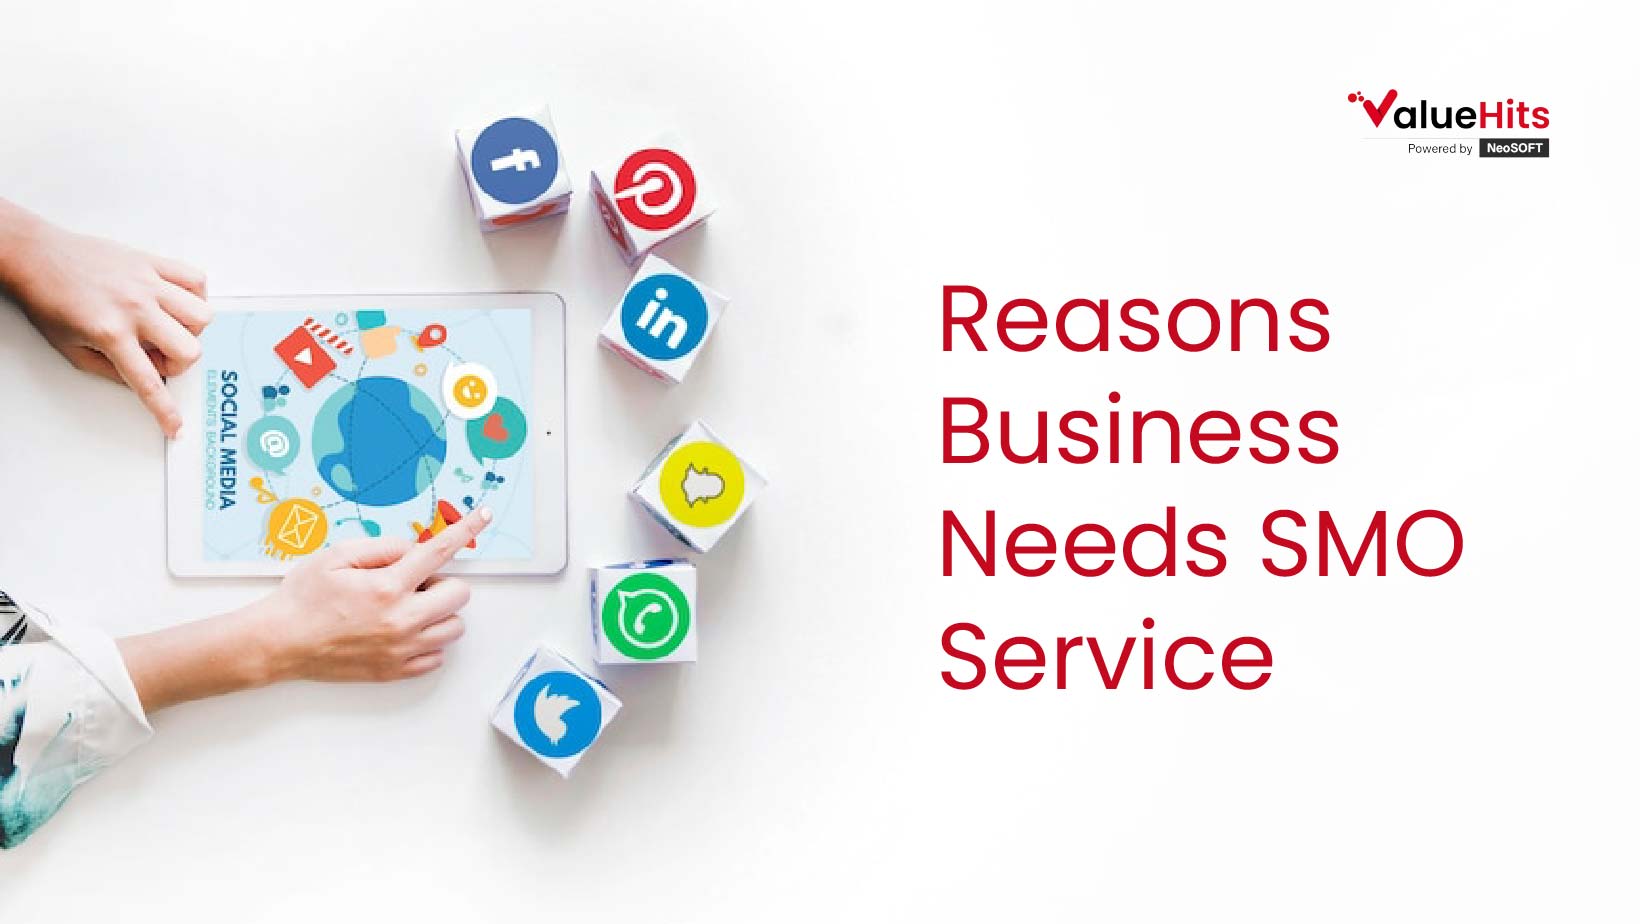 Reasons Business Needs SMO Service